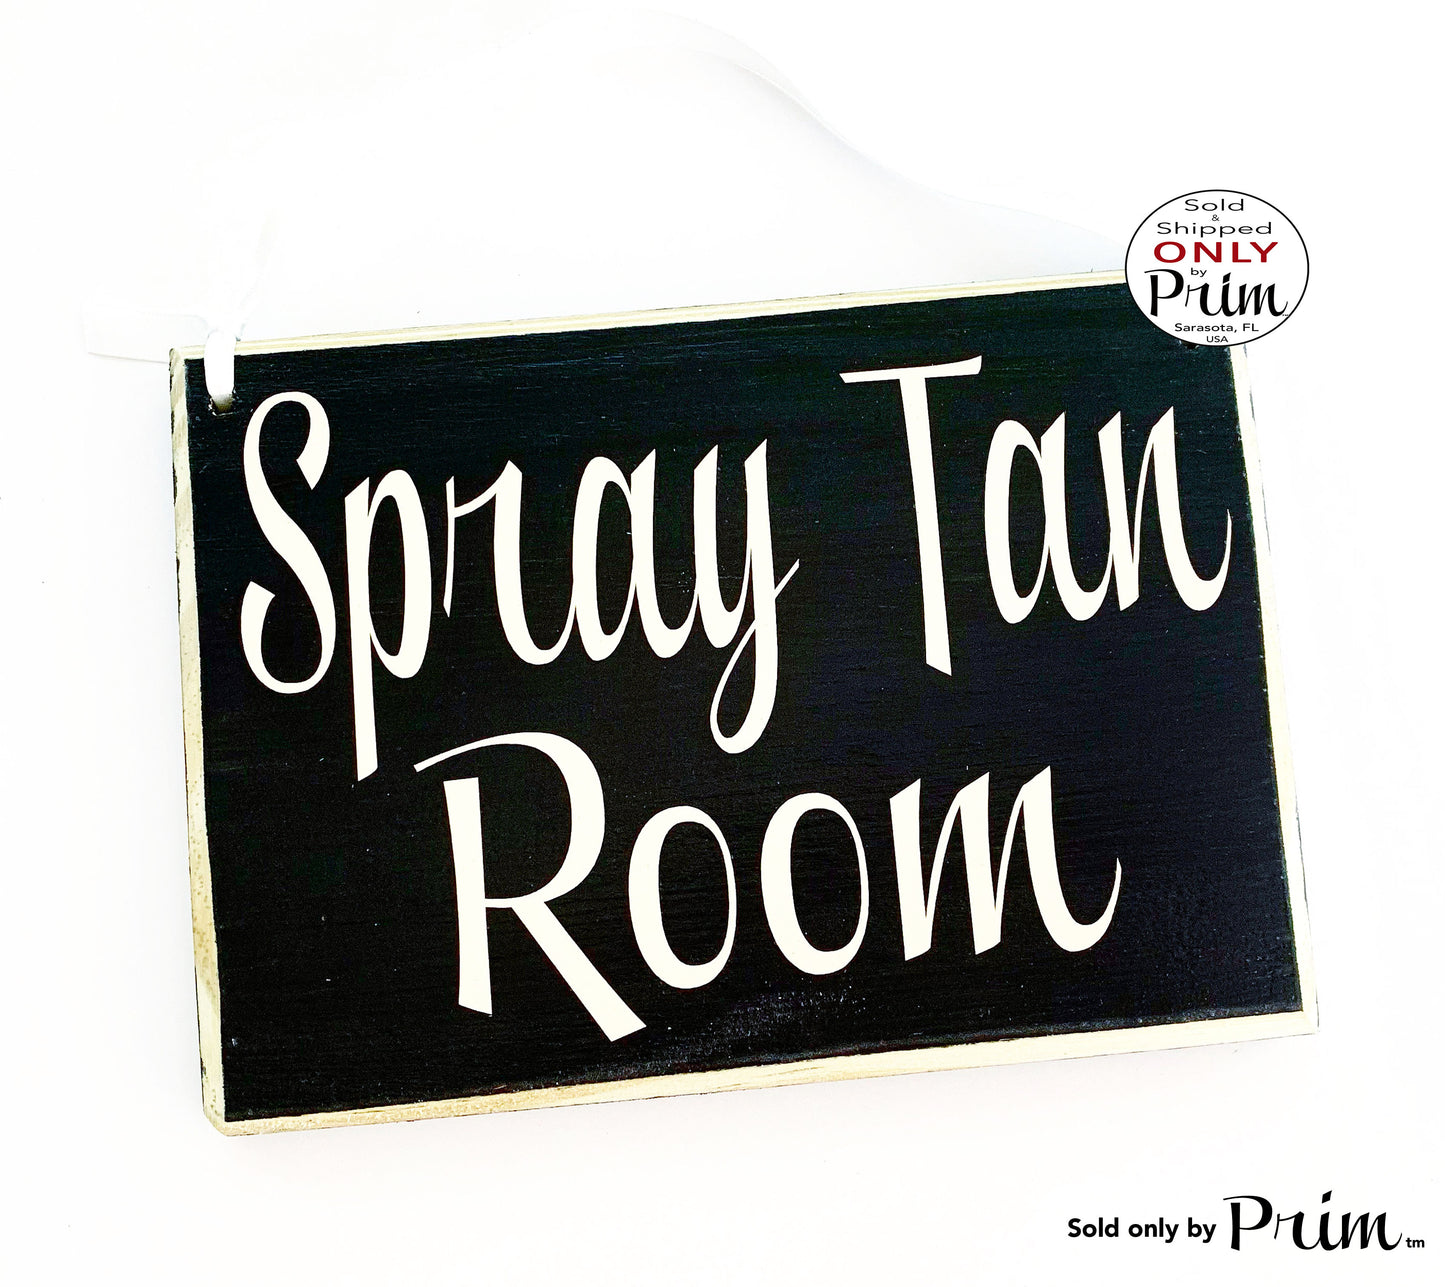 8x6 Spray Tan Room Custom Wood Sign | Tanning Spa Service Makeup Airbrush Salon Please Do Not Disturb No Entry Room Wall Hanger Door Plaque Designs by Prim